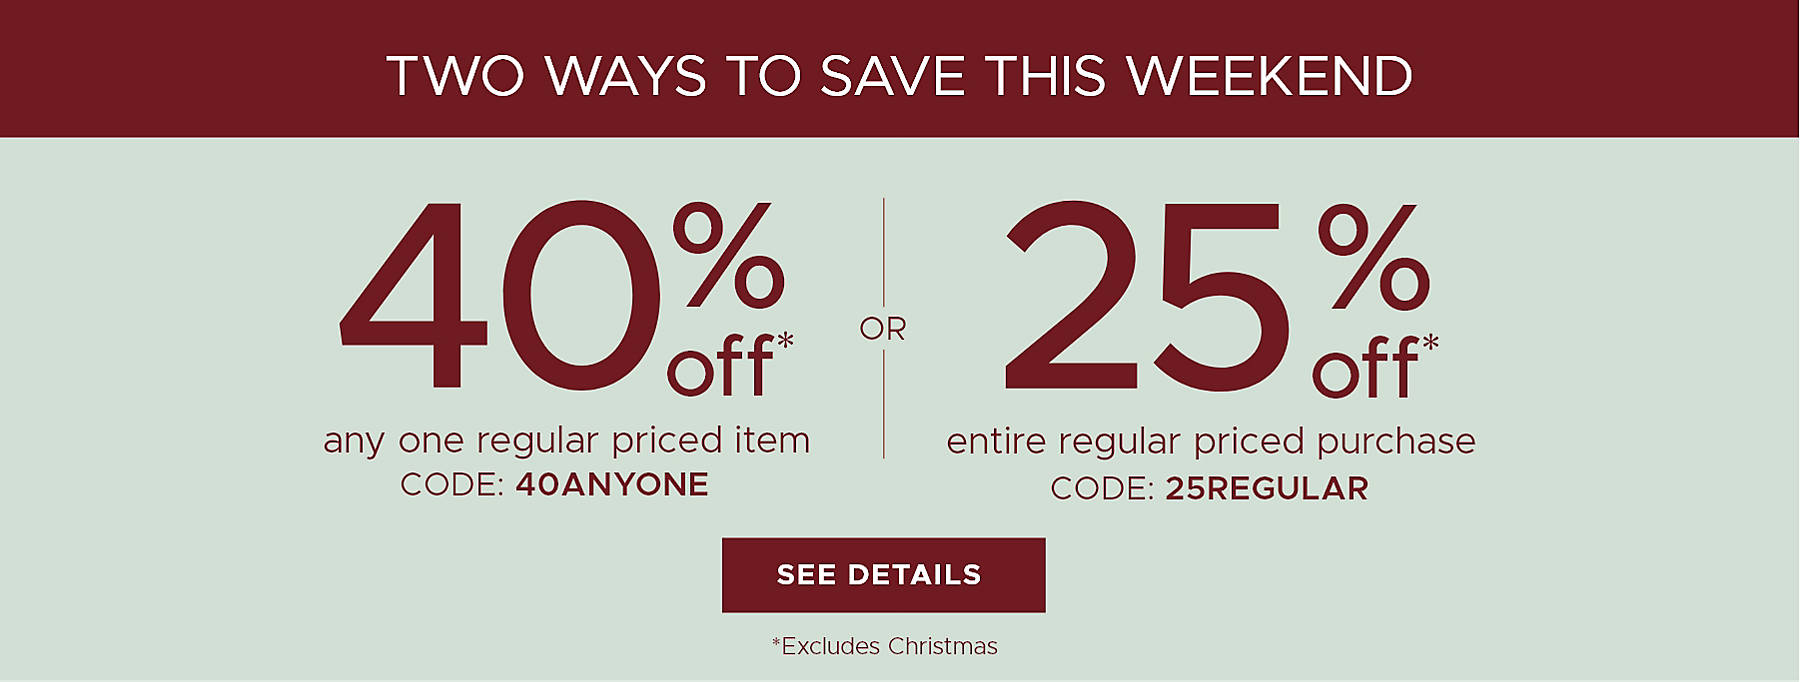 Two ways to save this weekend 40% off* any one regular priced item code: 40ANYONE or 25% off* entire regular priced purchase code: 25REGULAR See Details *Excludes Christmas